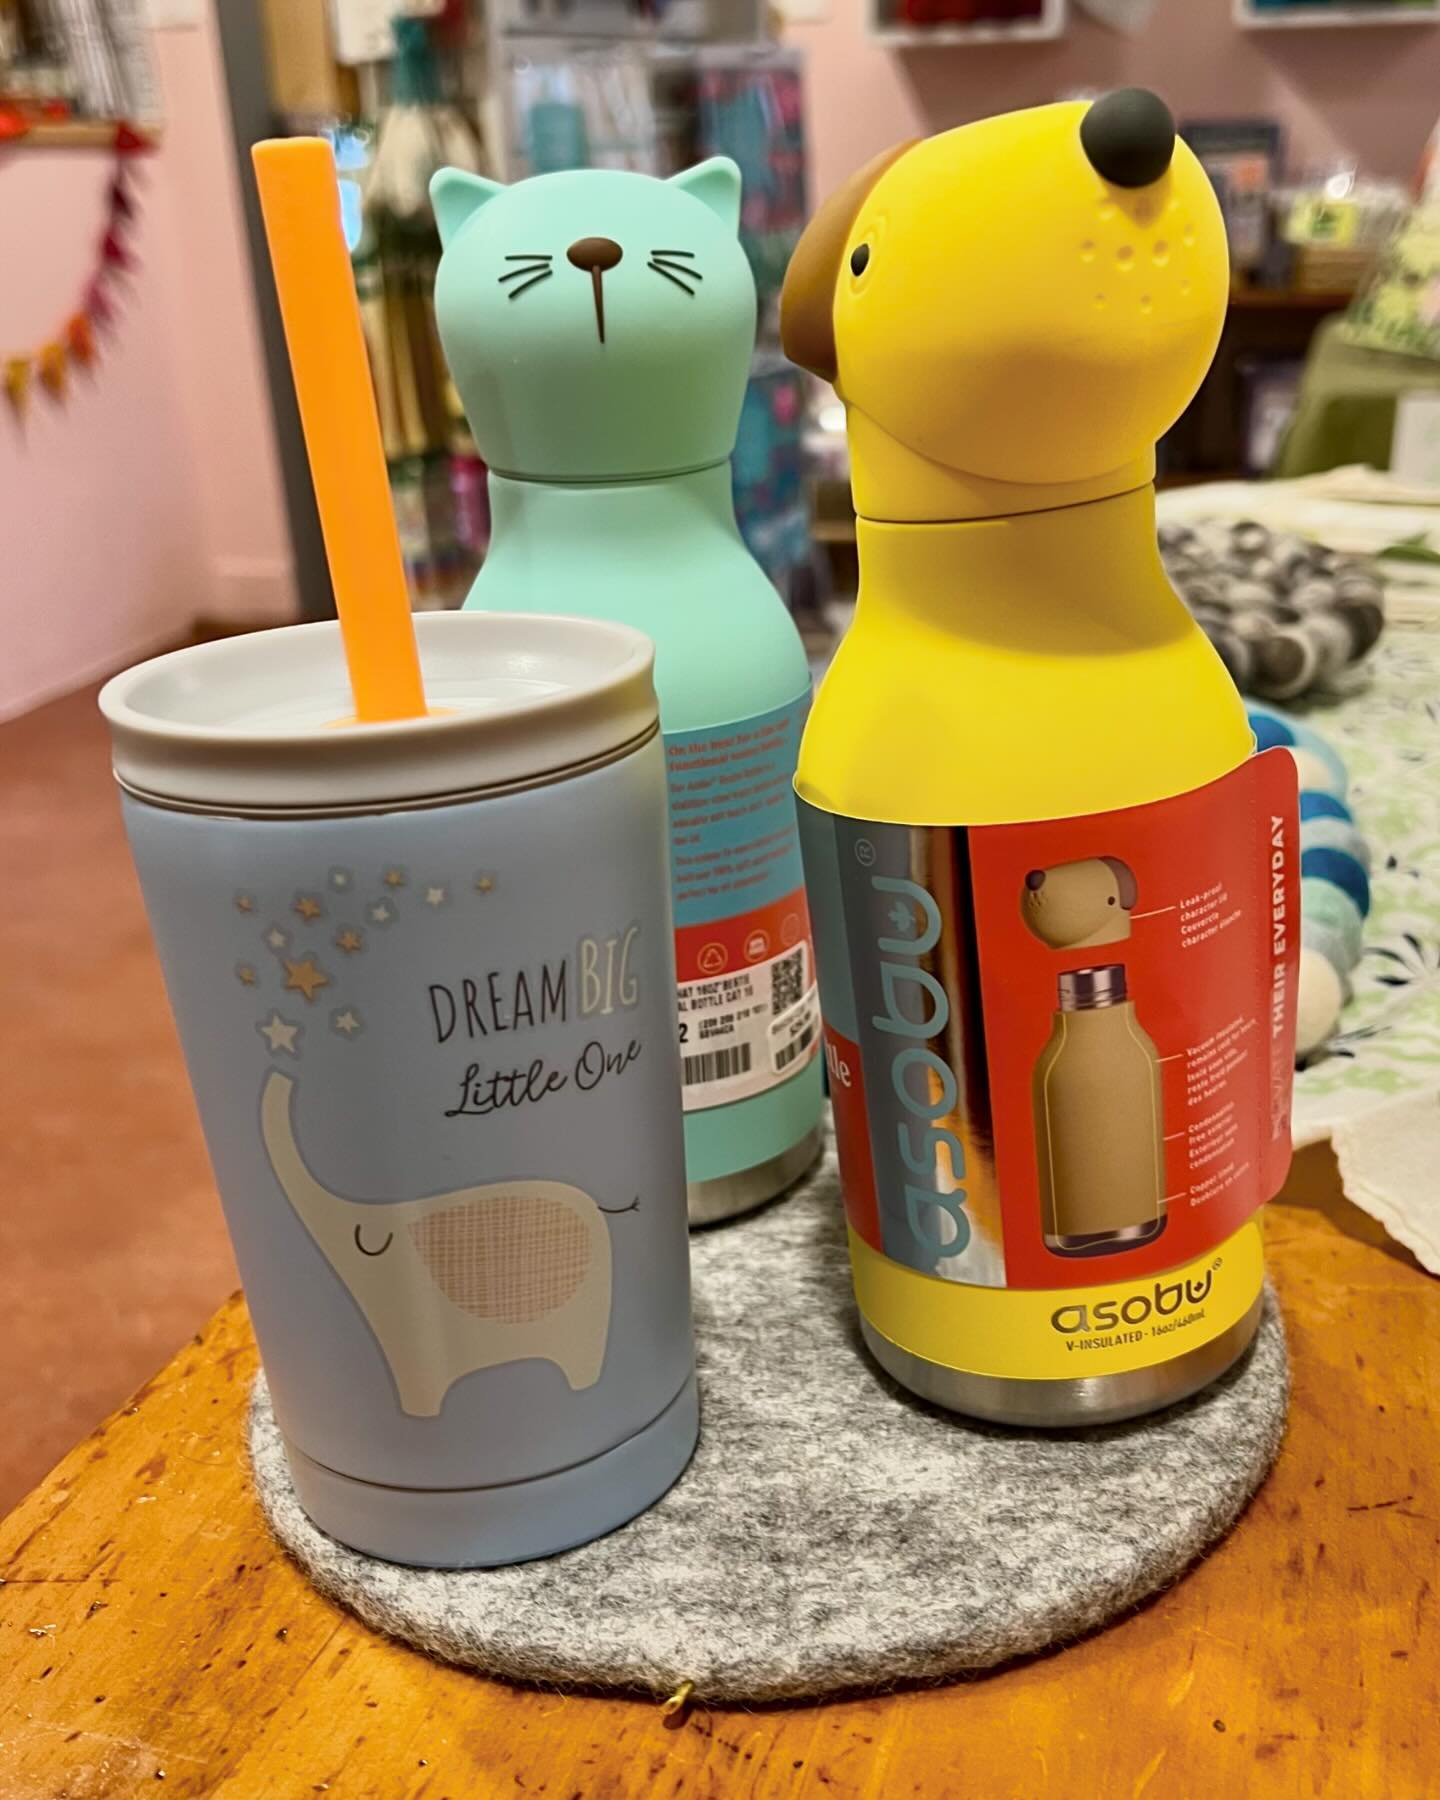 Awesome new water bottles to start your outdoor activities off right!  Double-walled, stainless steel bottles with super cute designs. For little kids and big kids too!
-
-
@homespunwaldorf @waldorfschooloflexington @asobubottle #bestiebottle #stainl